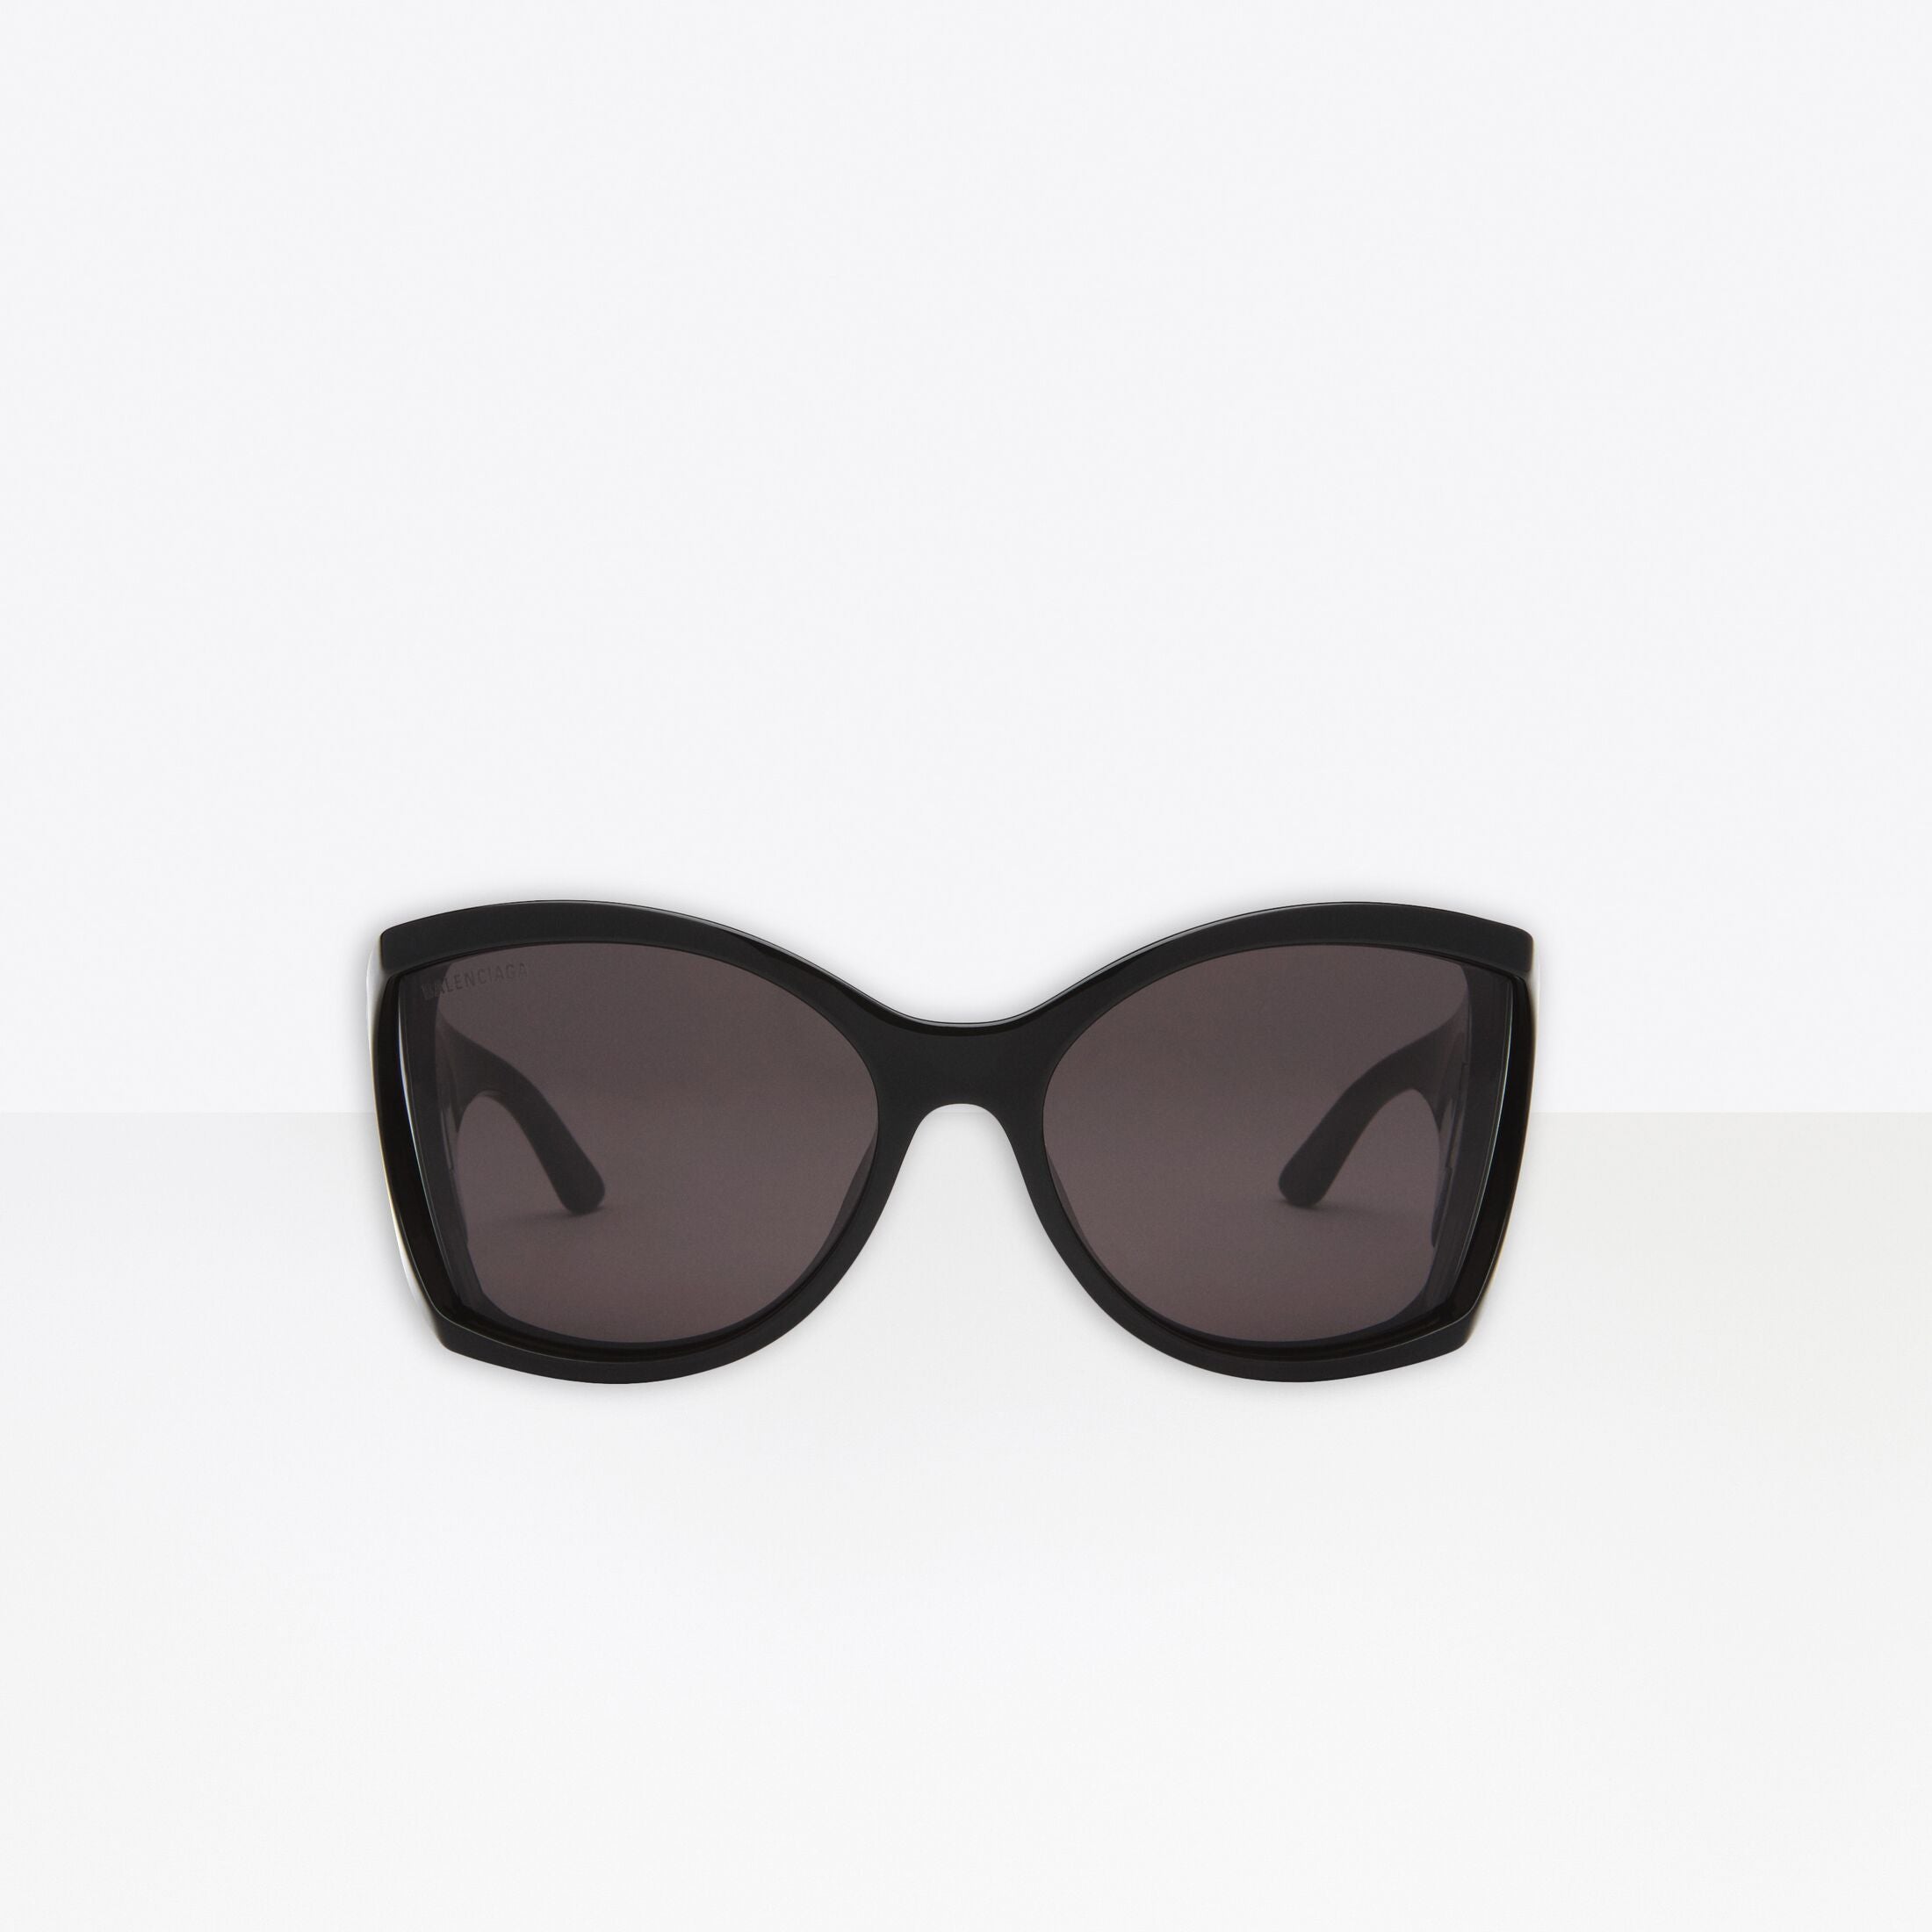 Void butterfly sunglasses with logo